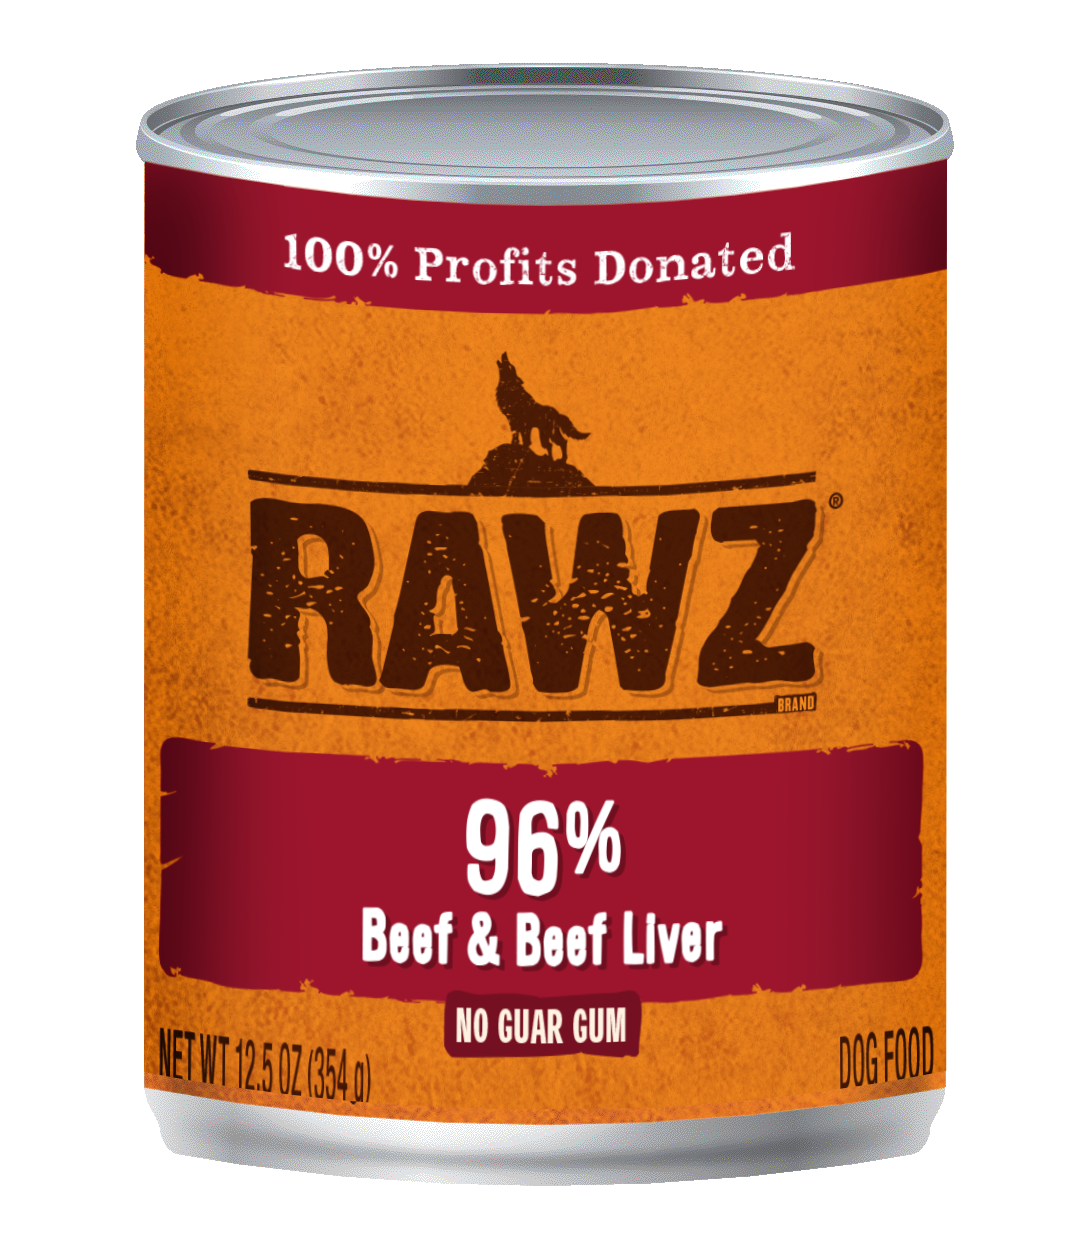 RAWZ 96% Beef and Beef Liver Canned Food for Dogs